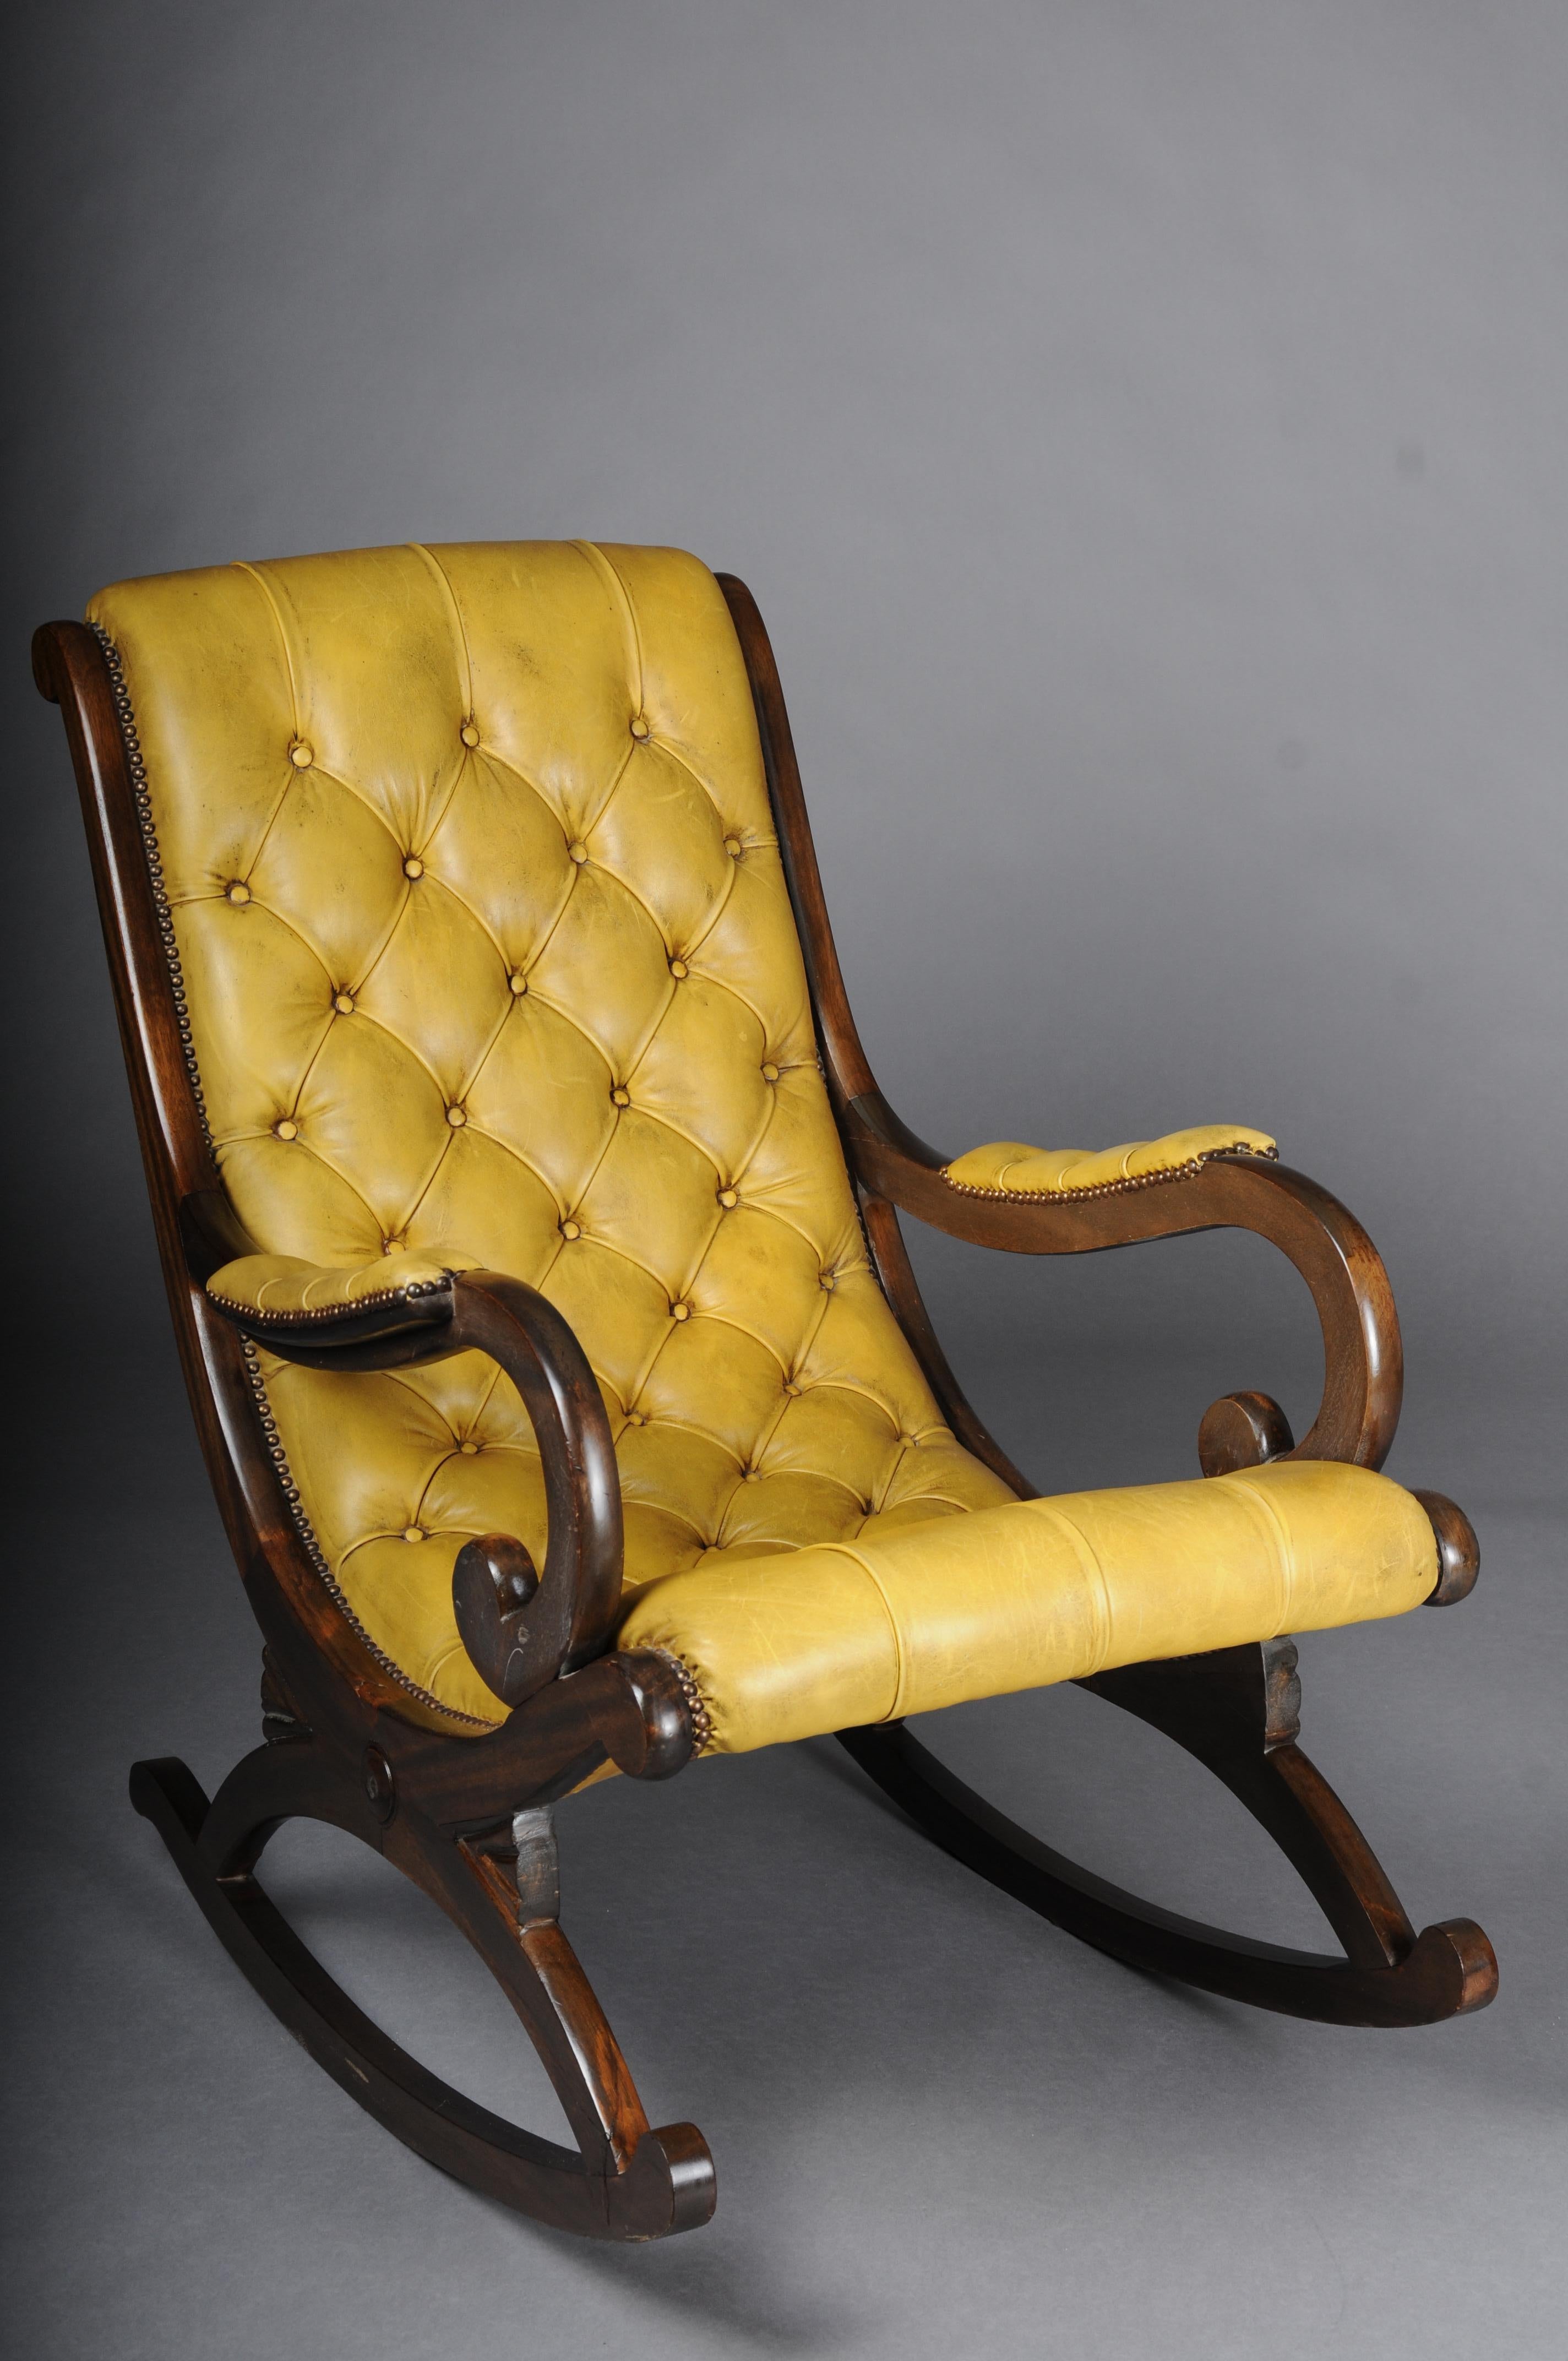 20th Century Antique English Chesterfield rocking chair

Solid wood, finely carved. Comprehensively covered with high-quality Chesterfield leather.

seat height 47
seat width 52
seat depth 56
